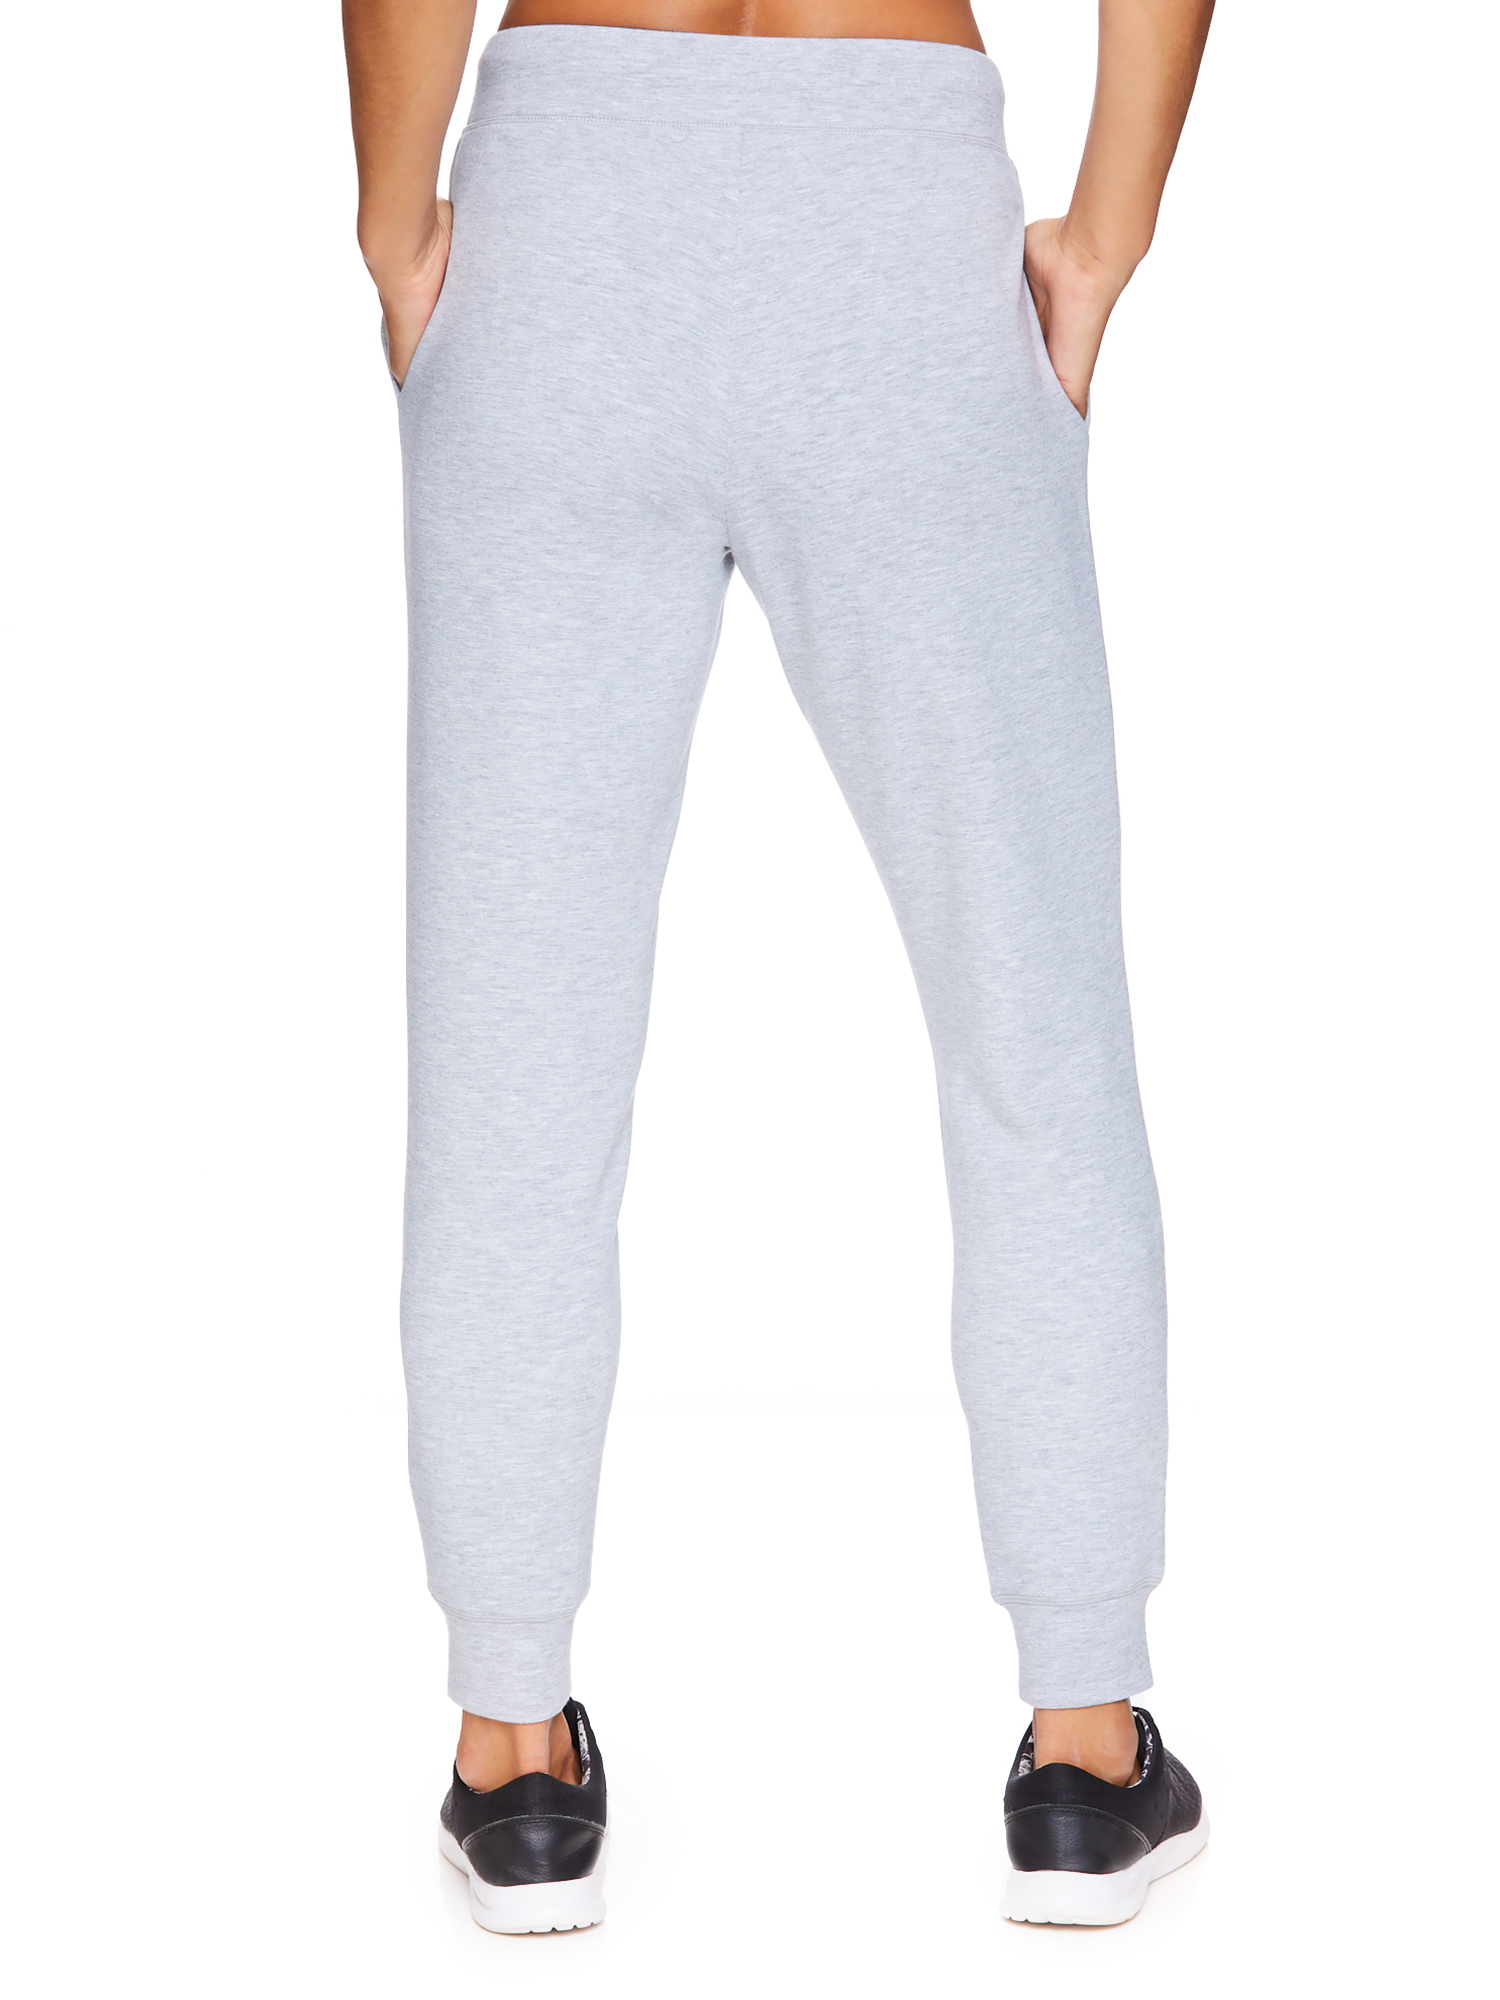 Reebok Womens Soft Jogger with Pockets - image 2 of 4